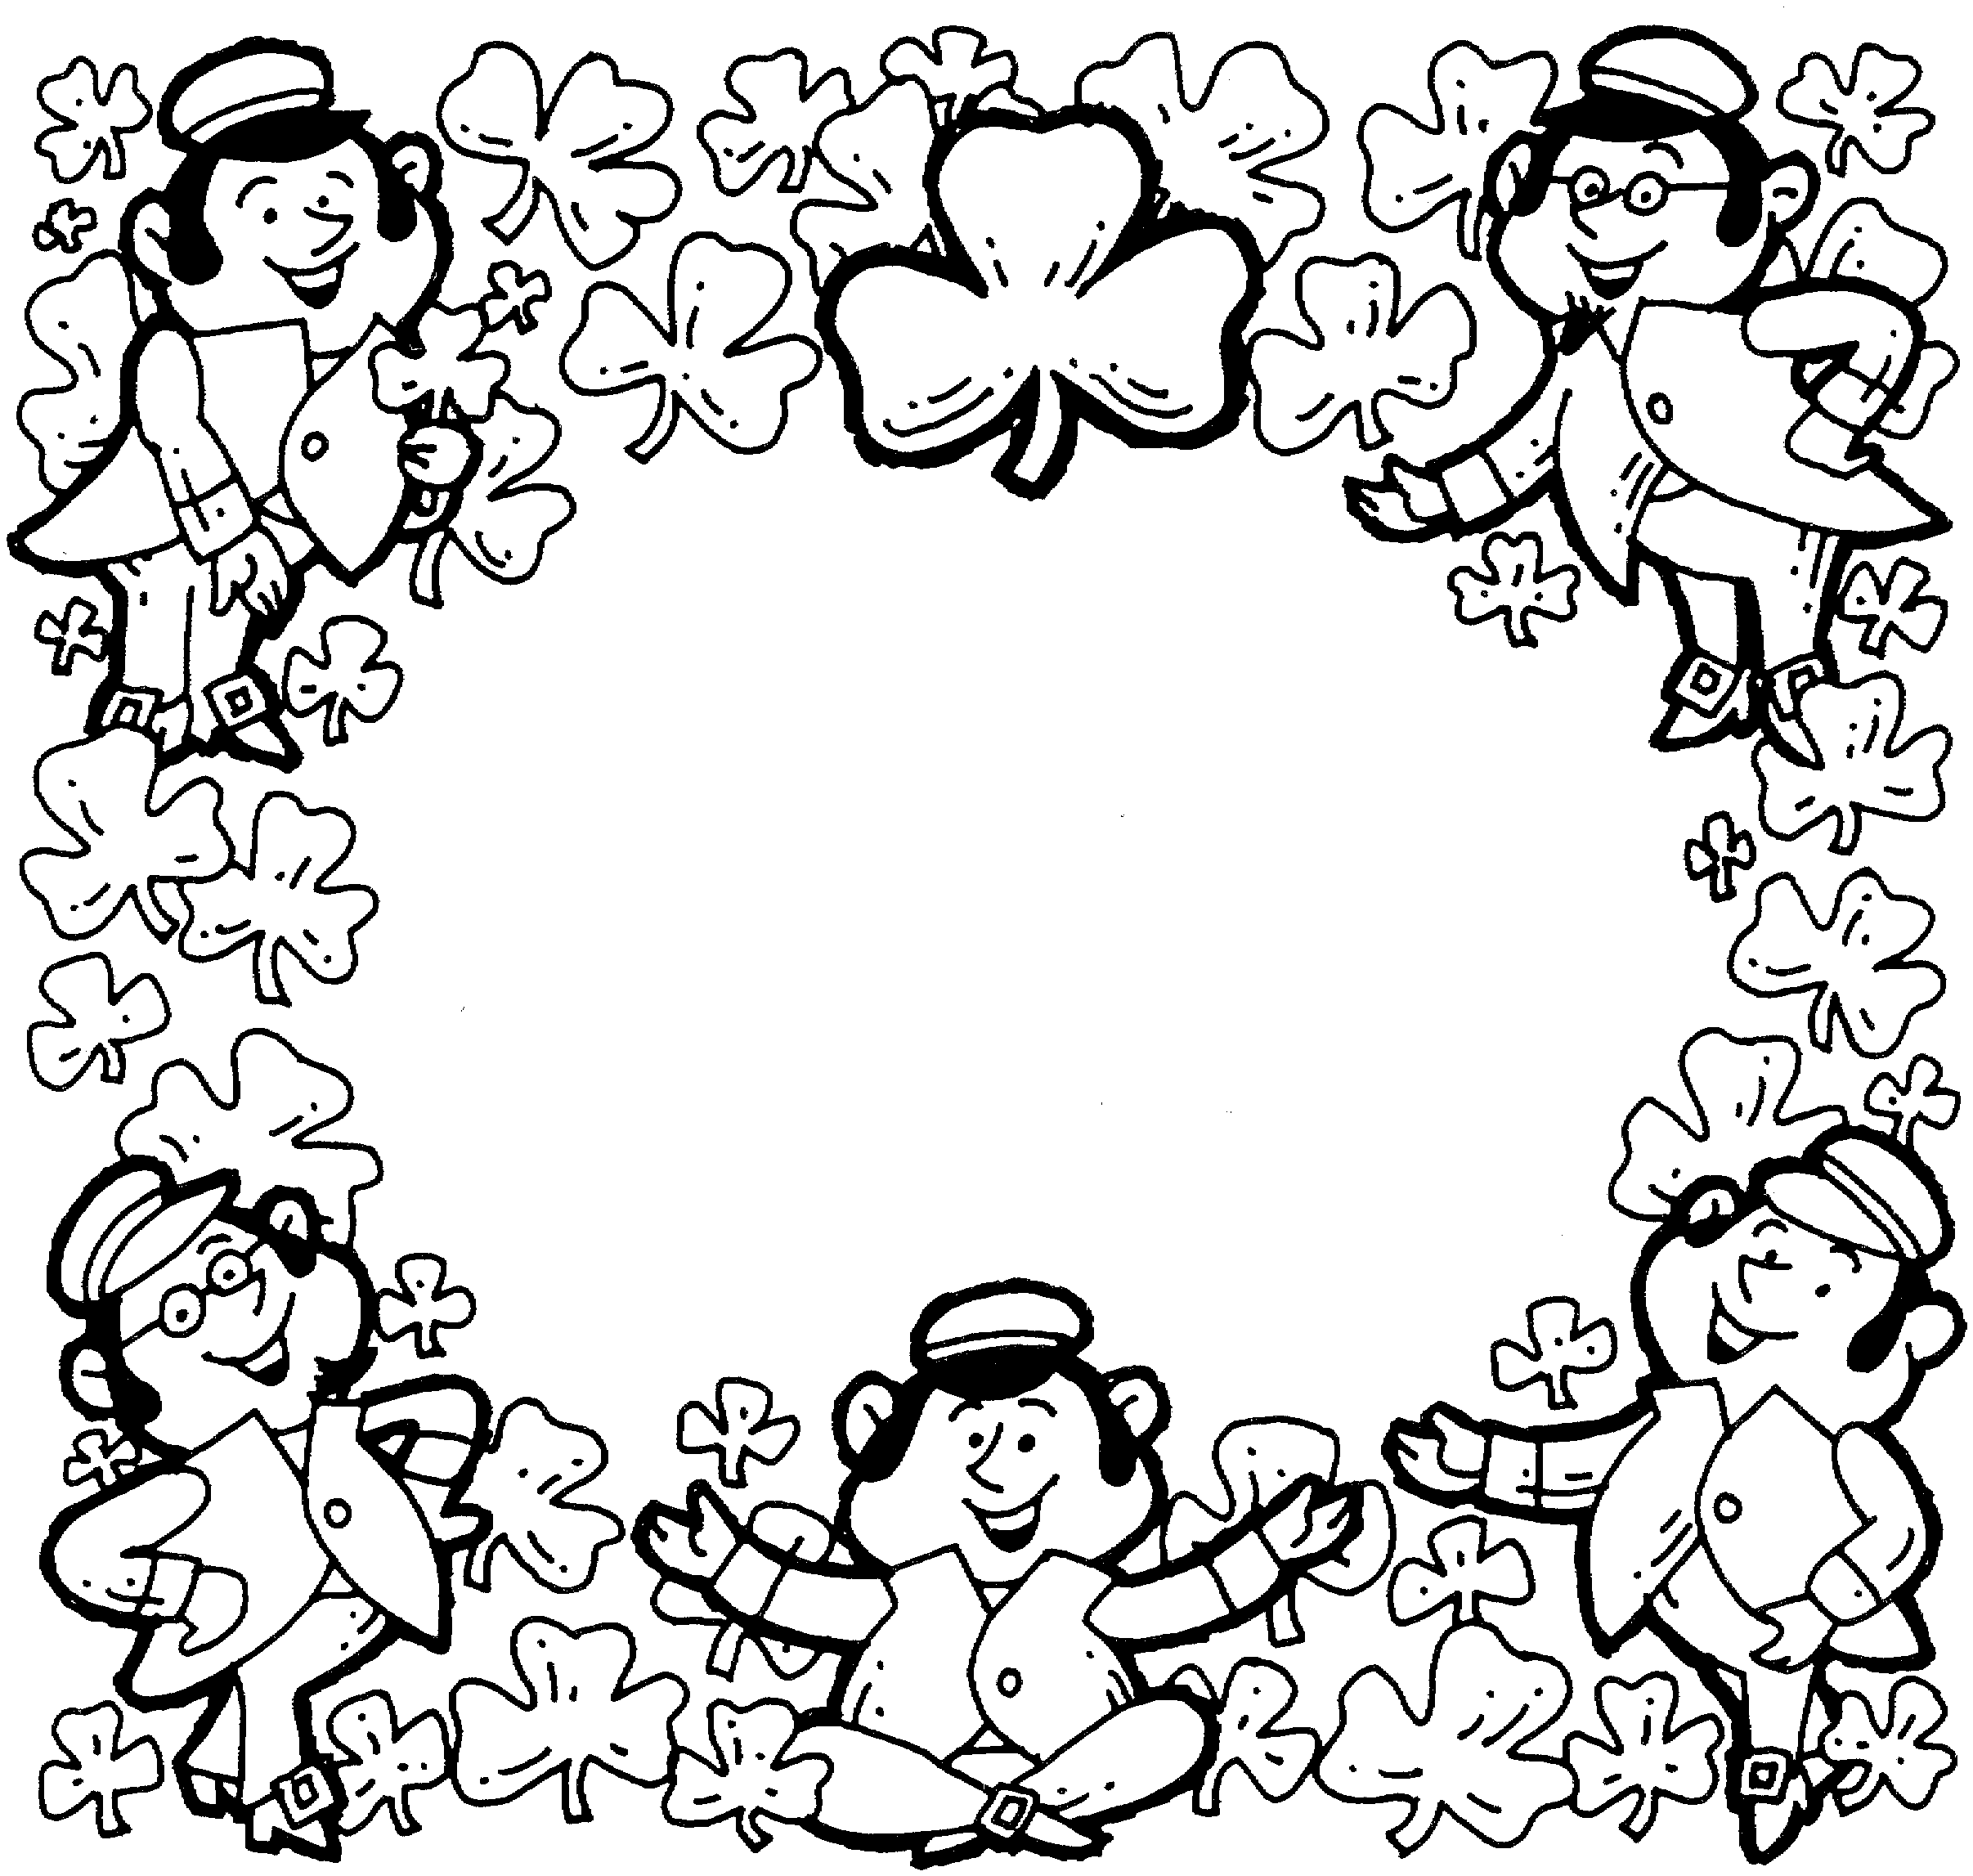 St Patricks Day Coloring Pages Dr Odd